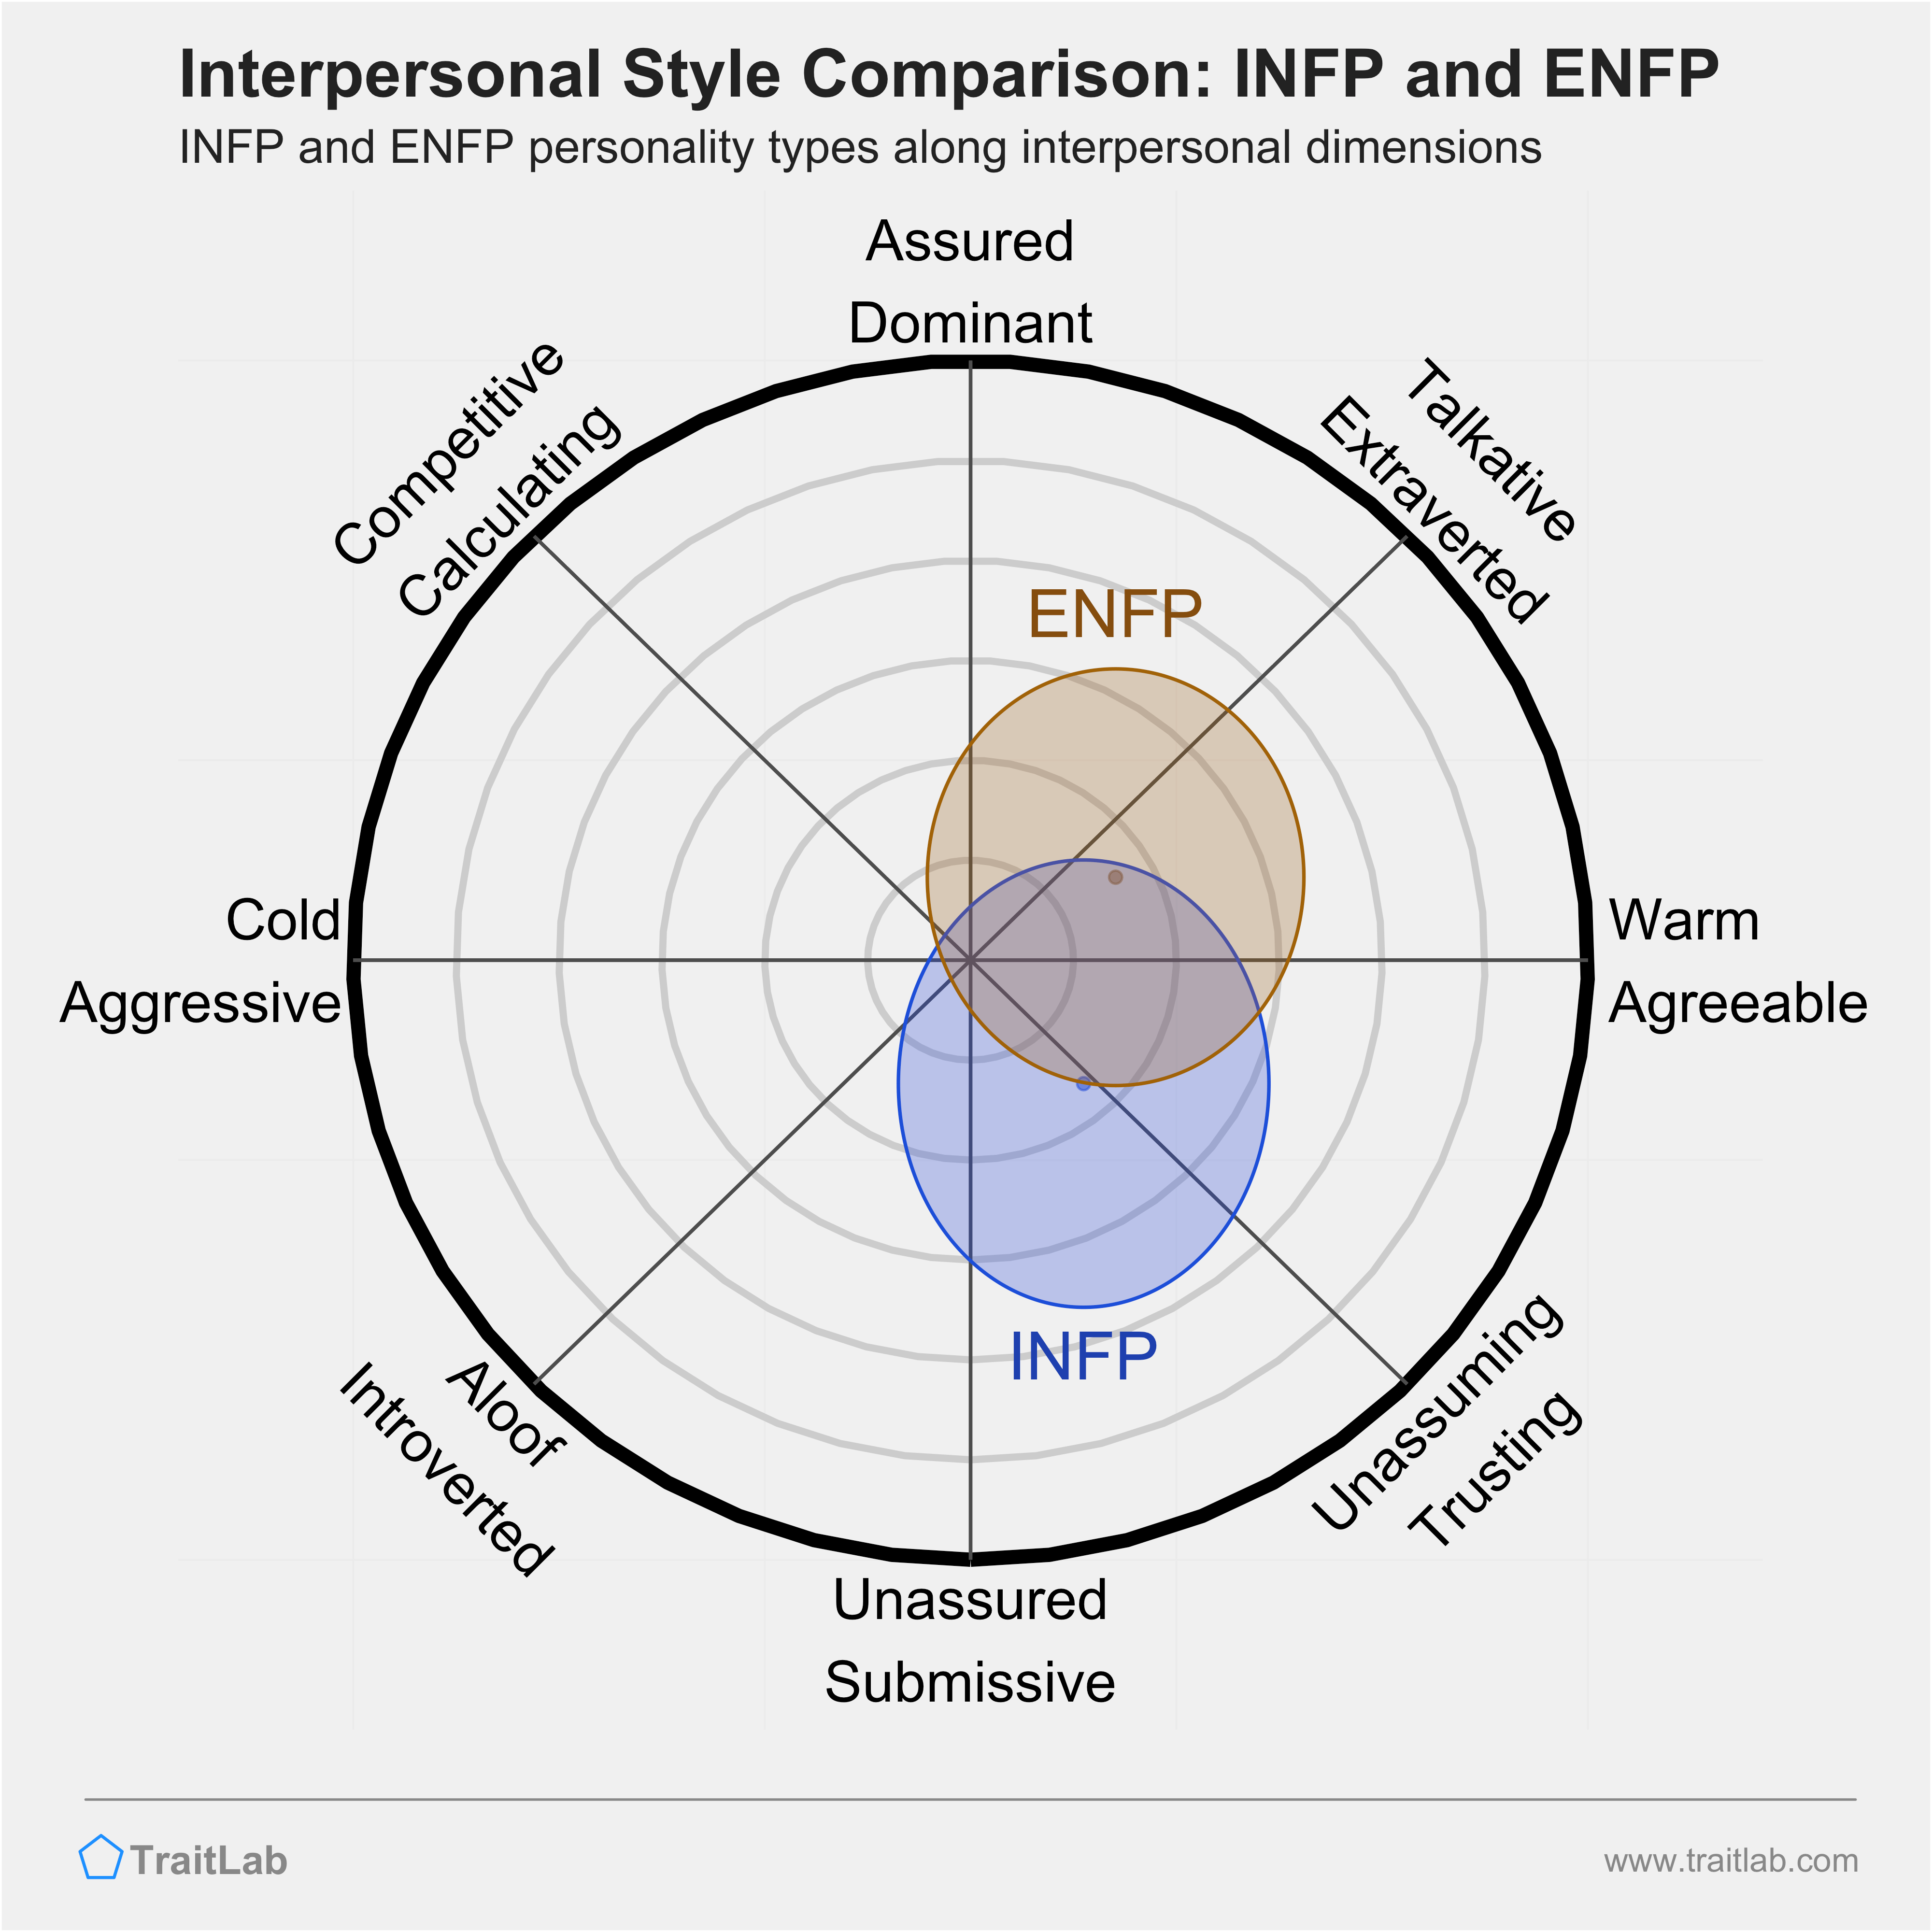 INFP and ENFP comparison across interpersonal dimensions